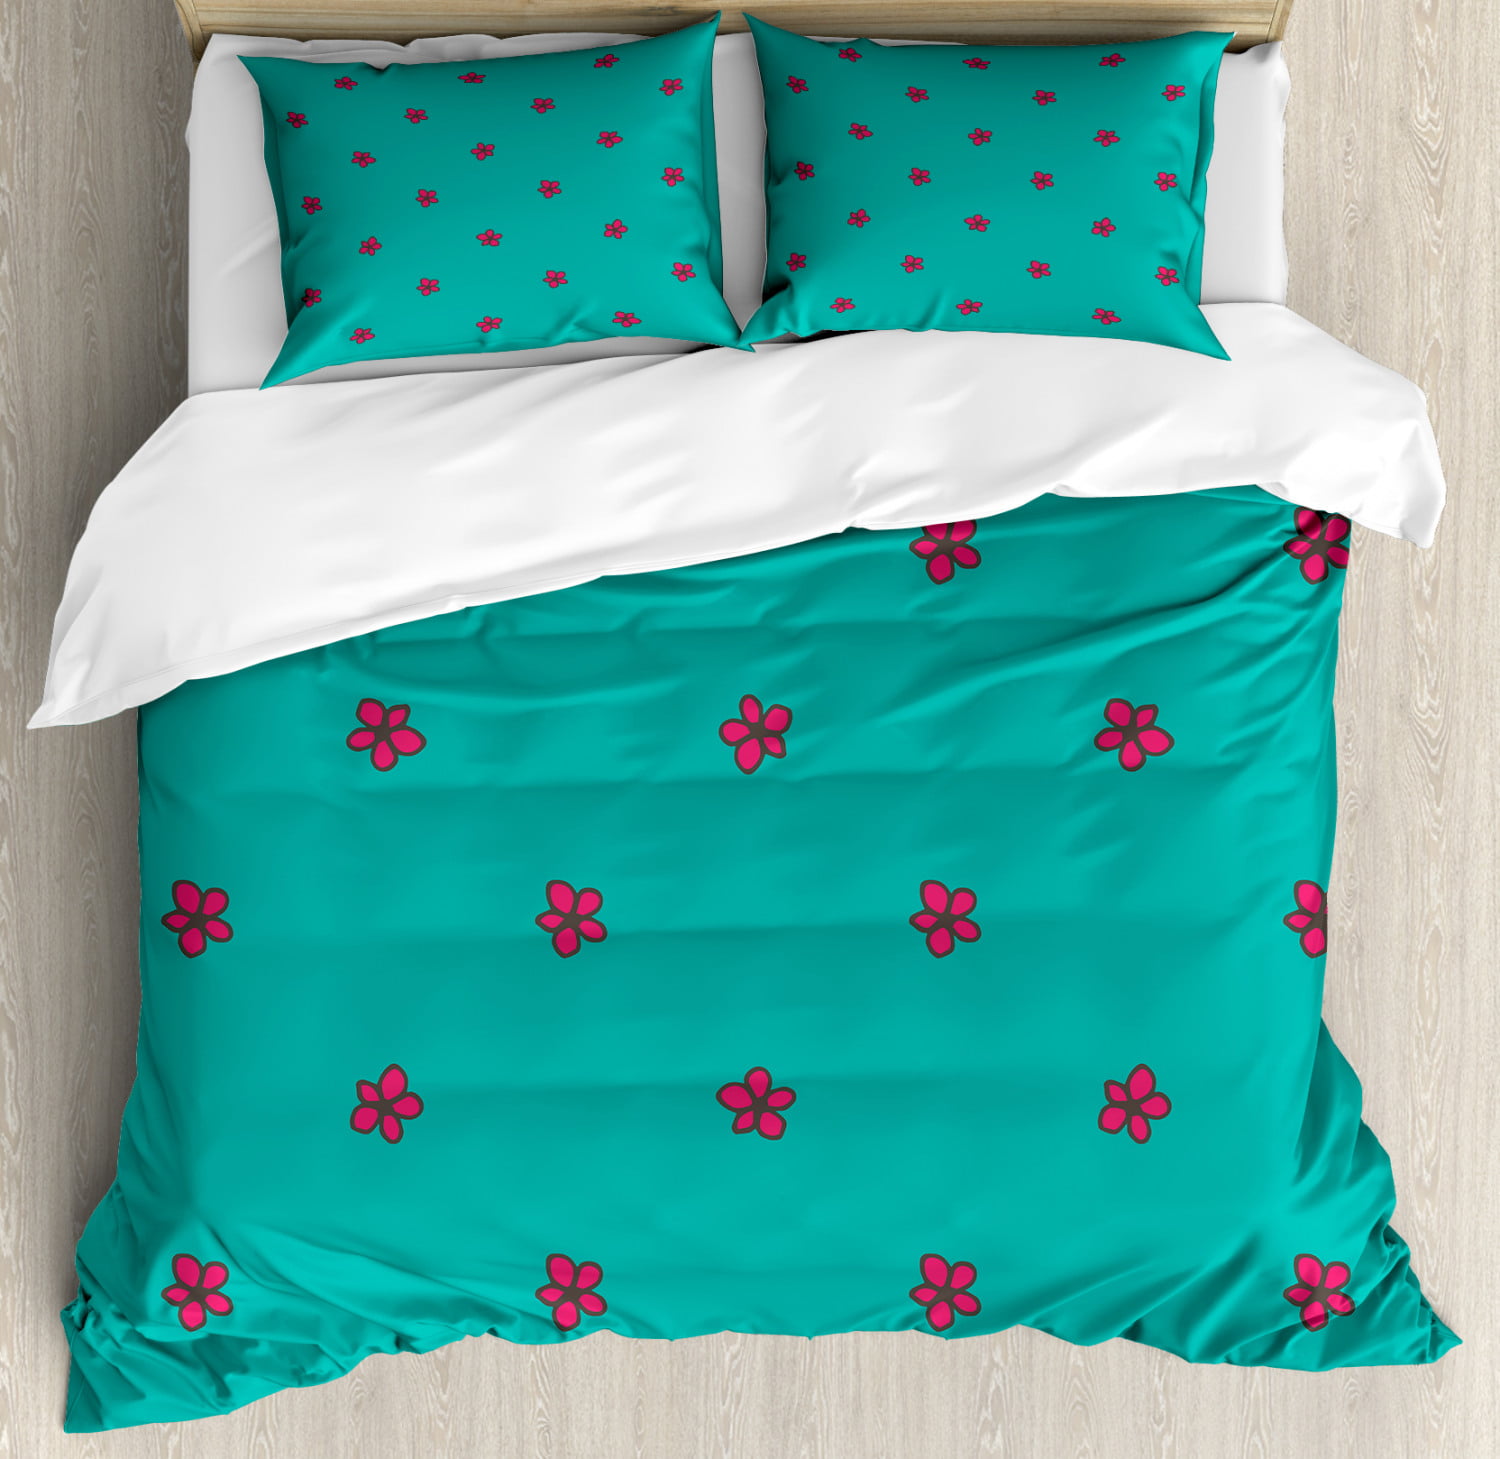 Teal King Size Duvet Cover Set Hand Drawn Pink Wild Flowers